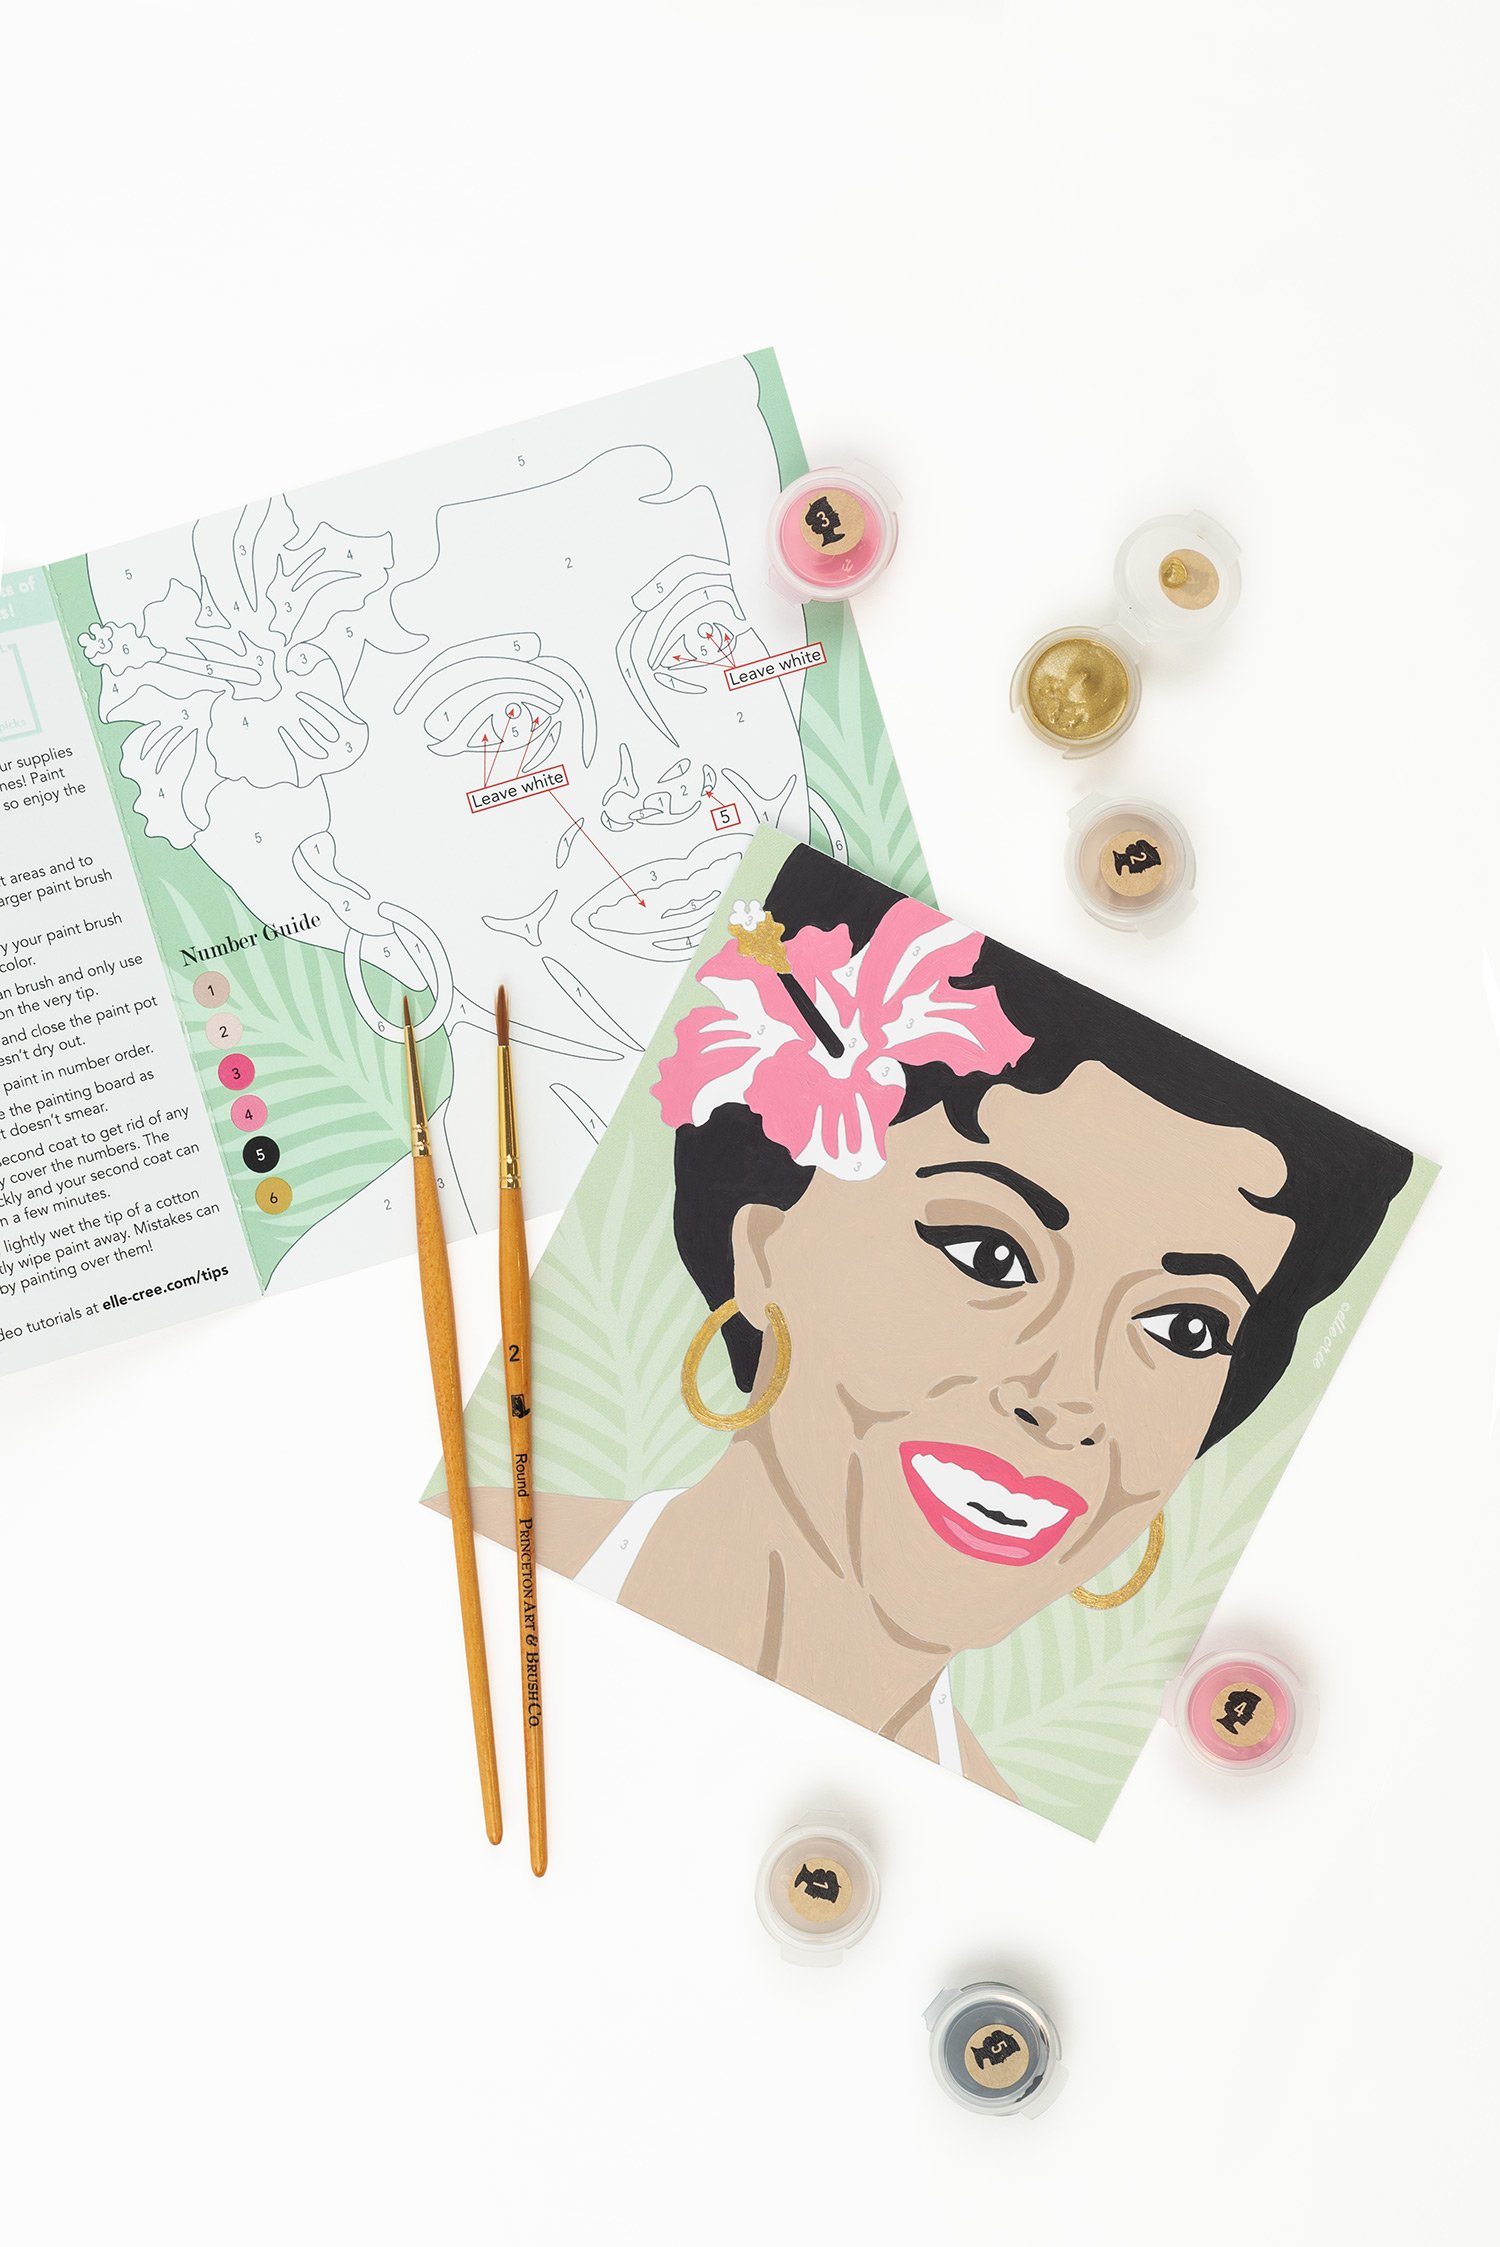 Rita Moreno  Mini Paint-by-Number Kit for Adults — Elle Crée (she